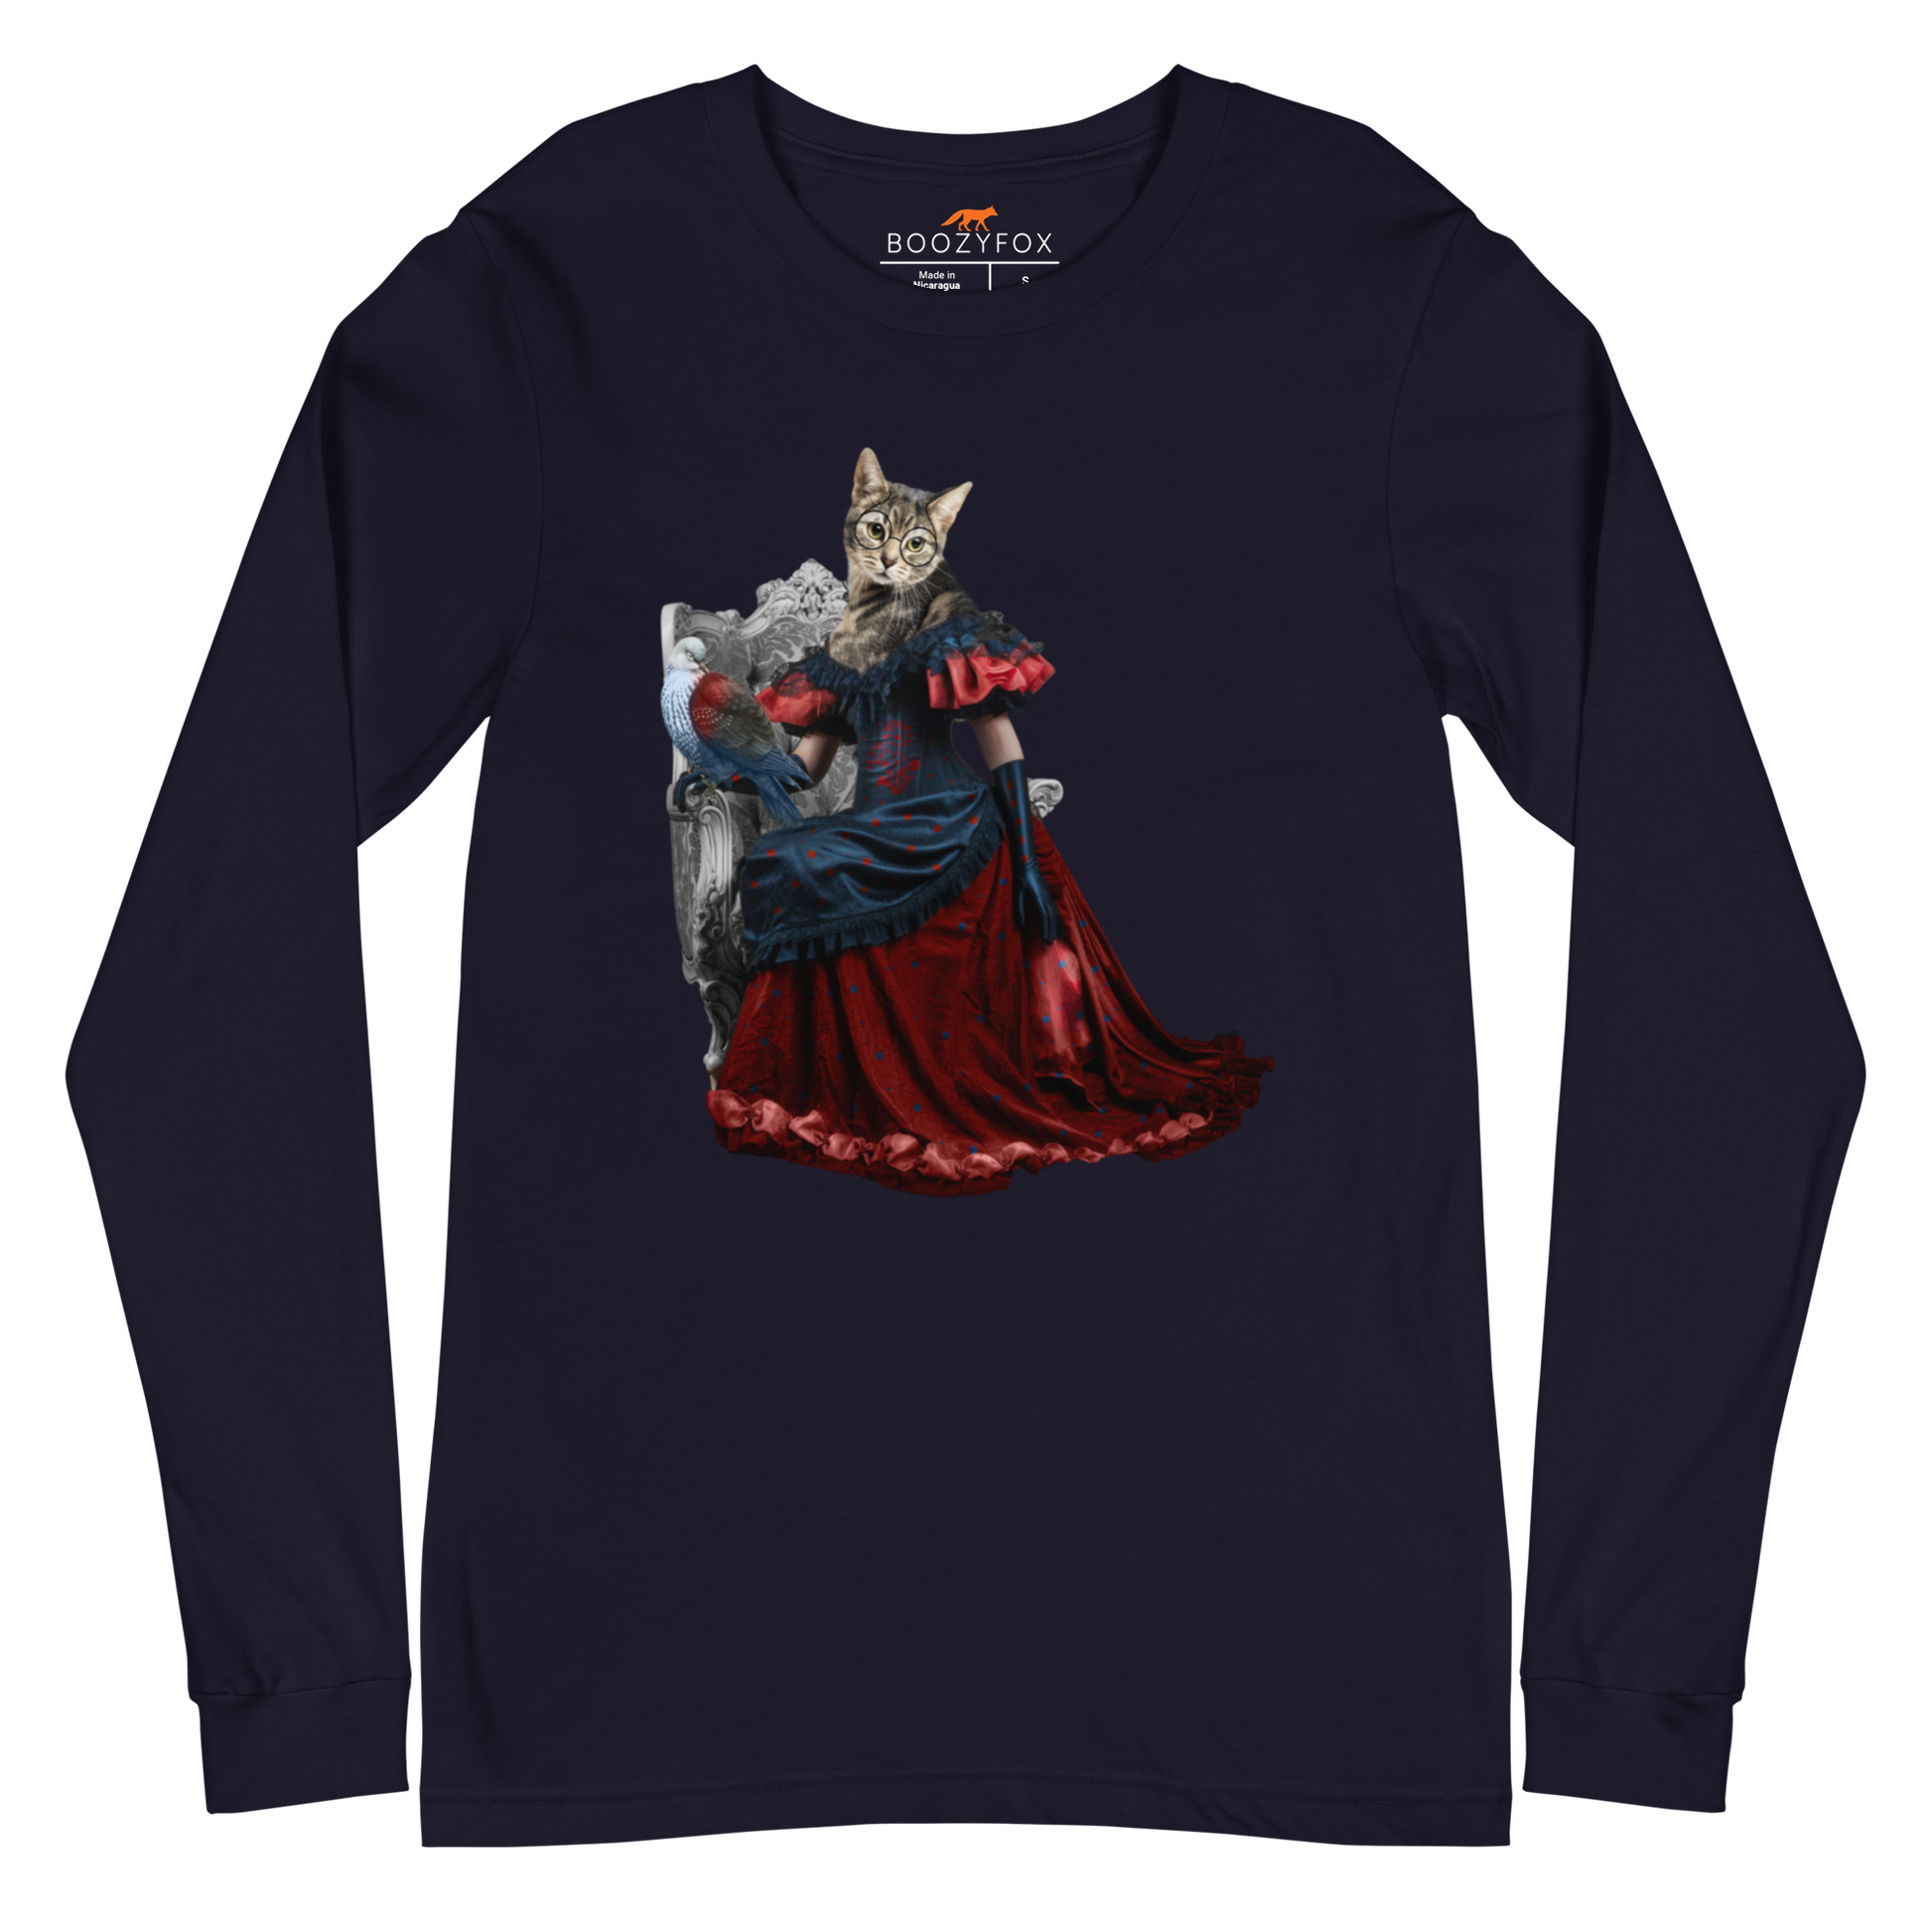 Navy Cat Long Sleeve Tee featuring an Anthropomorphic Cat graphic on the chest - Funny Cat Long Sleeve Graphic Tees - Boozy Fox